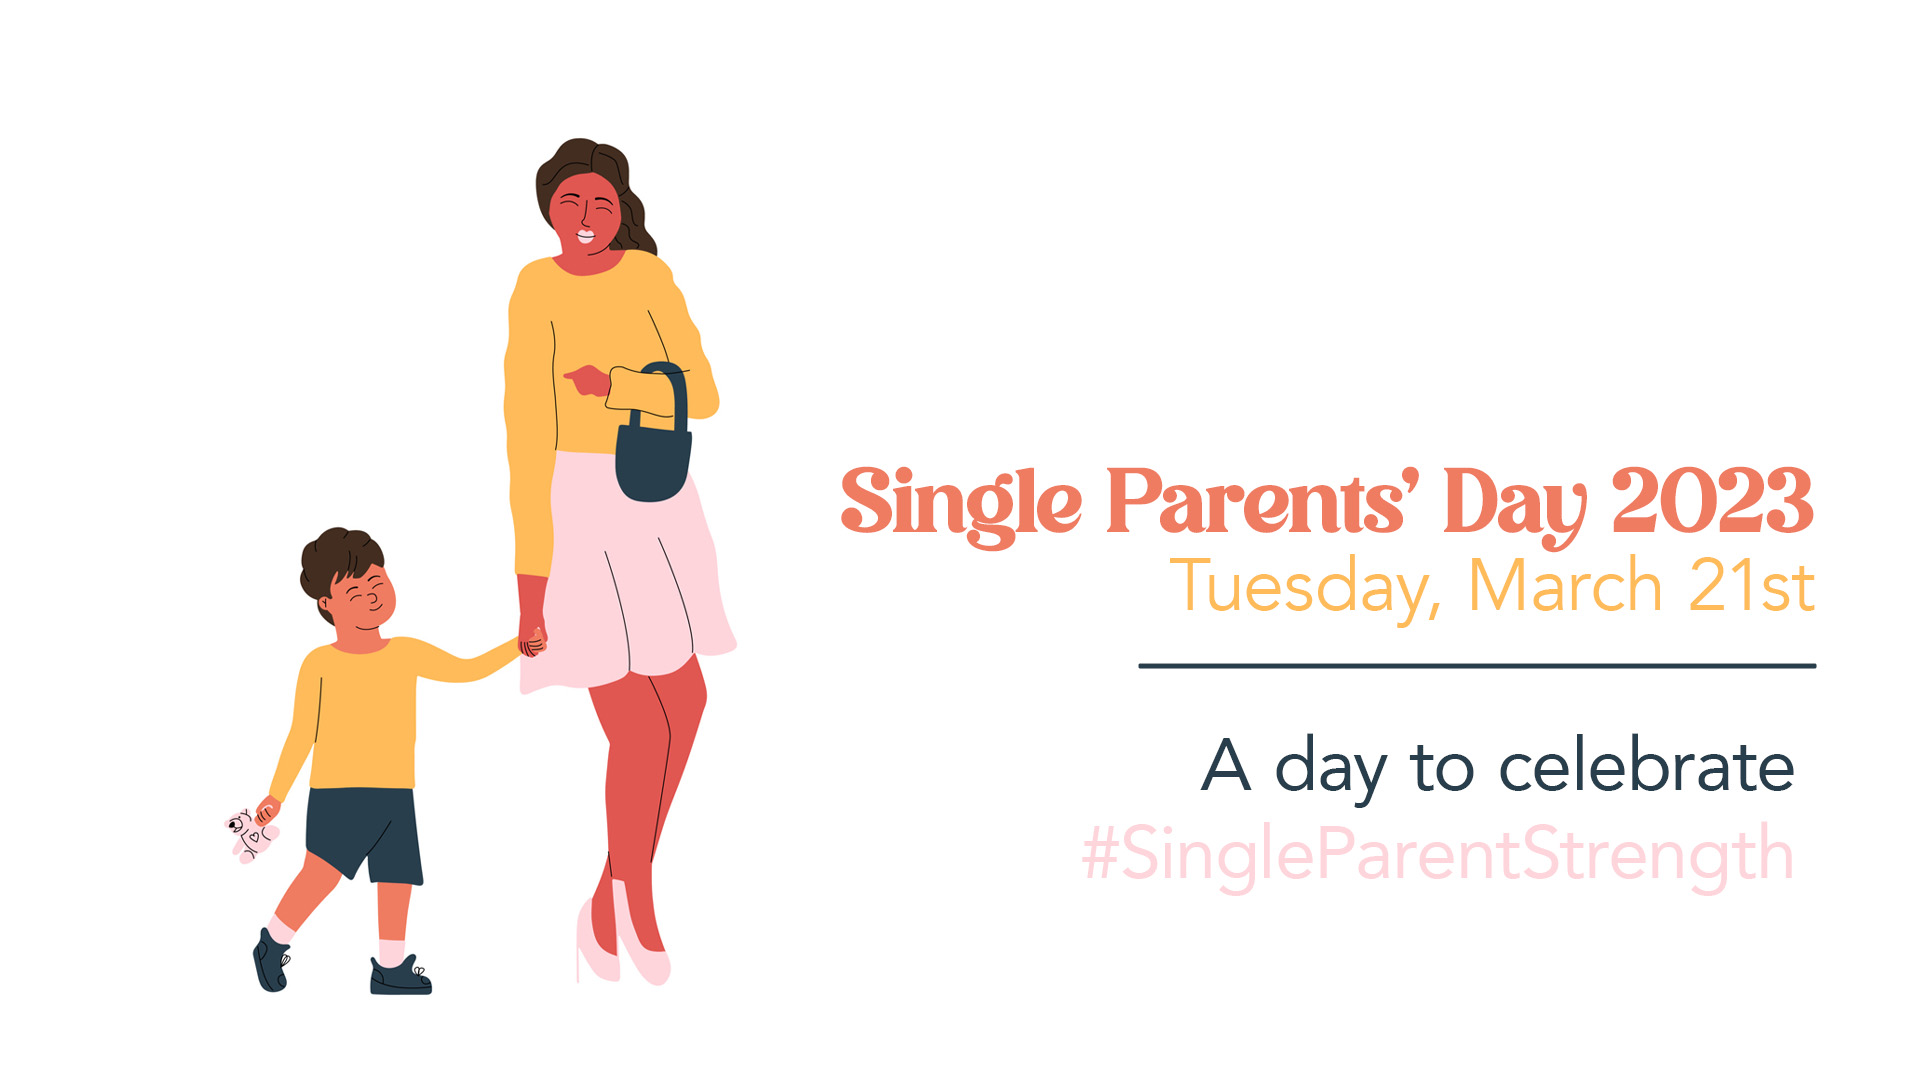 illustrated mother and son walking holding hands. "Single Parents' Day 2023 Tuesday March 21st a day to celebrate #SingleParentStrength" written on the right side of the screen